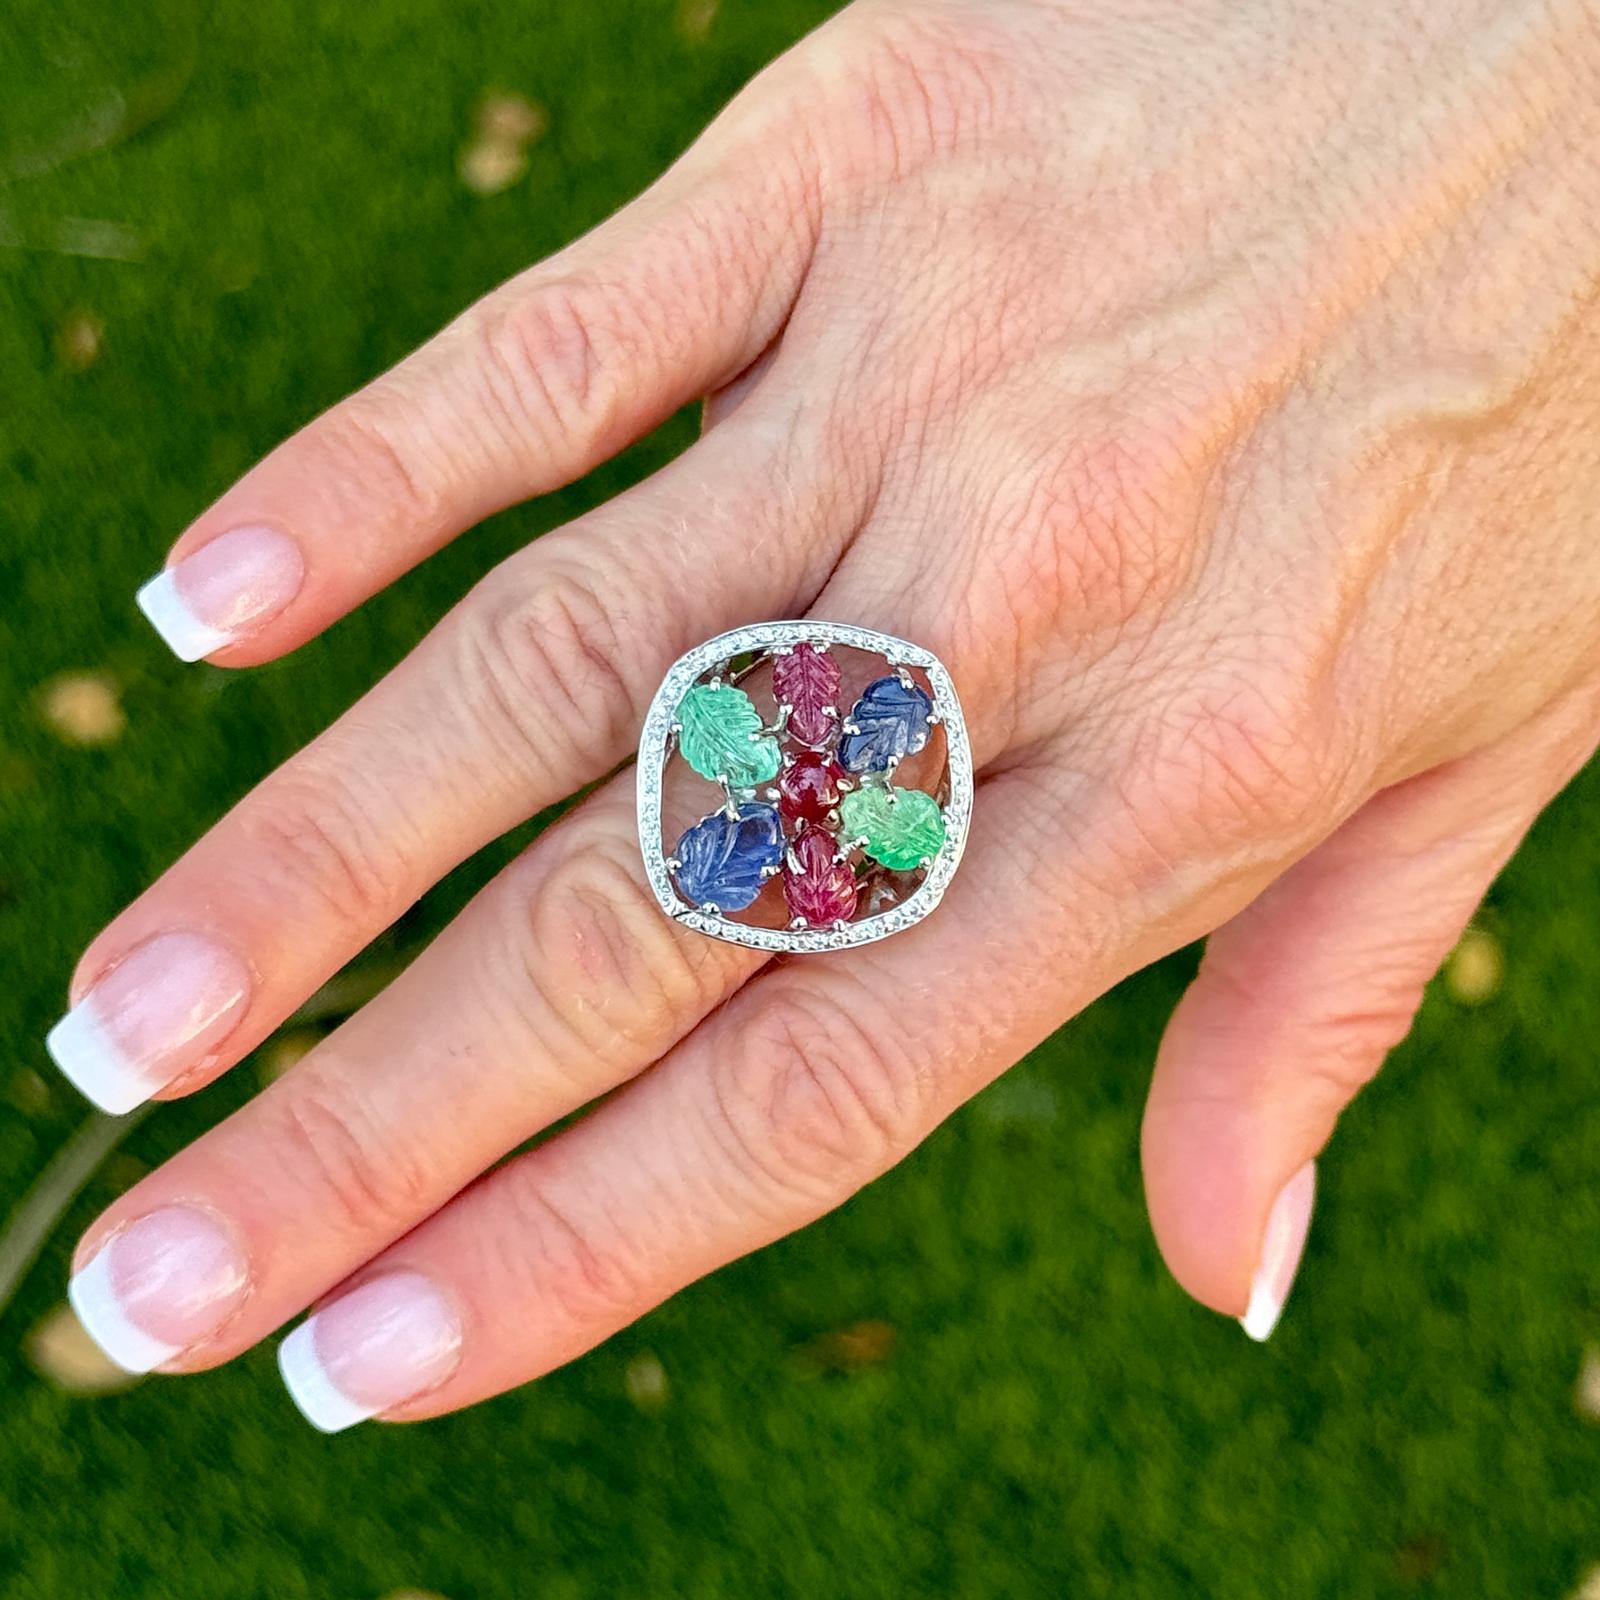 The 18k white gold tutti frutti diamond sapphire ruby emerald cocktail ring is a dazzling statement piece that combines luxurious materials with a vibrant array of gemstones. Its bold design, exquisite craftsmanship, and vibrant carved gemstones